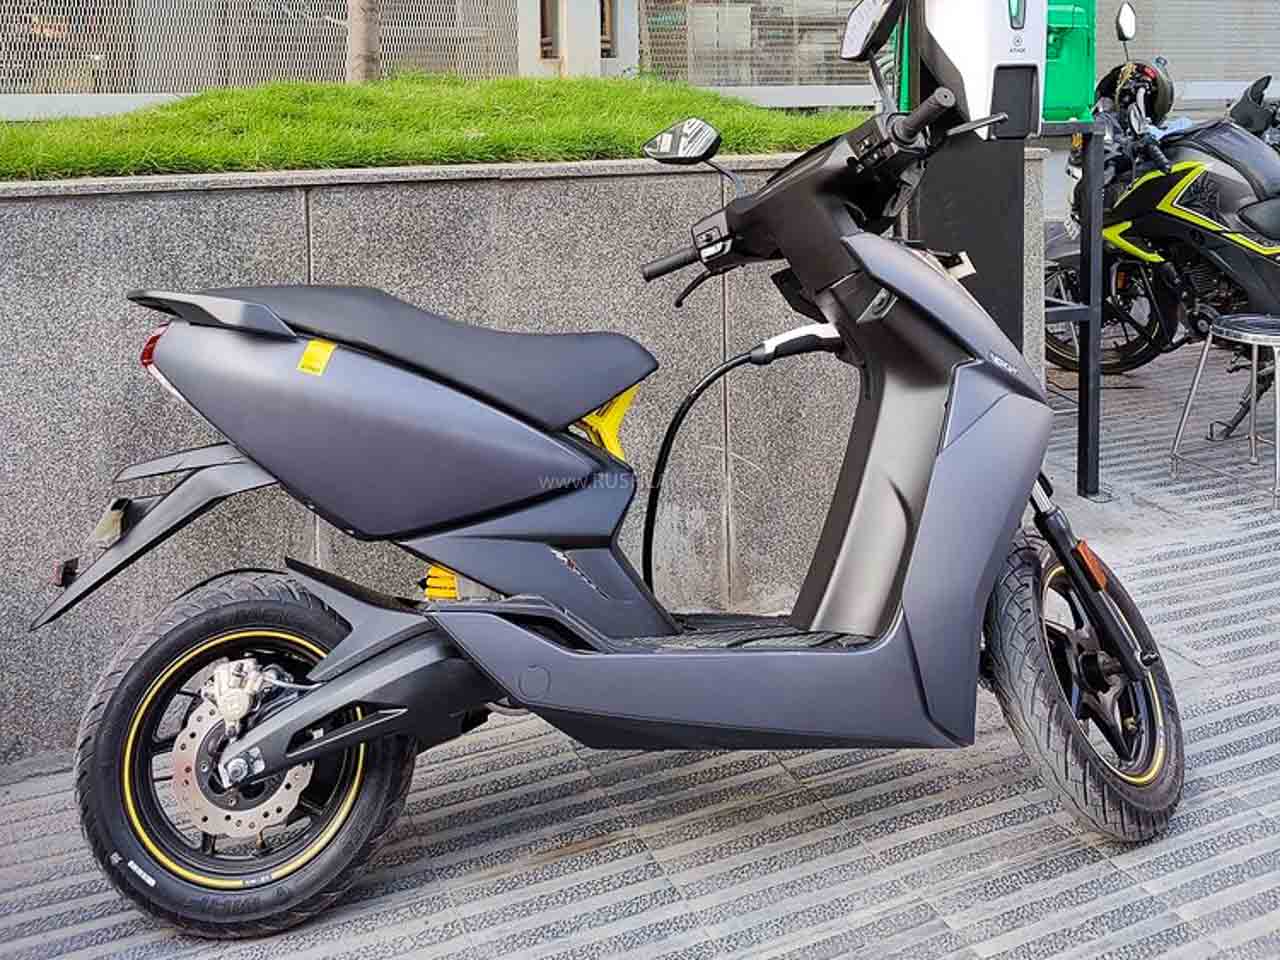 ather-450x-electric-scooter-to-launch-in-16-new-cities-first-tvc